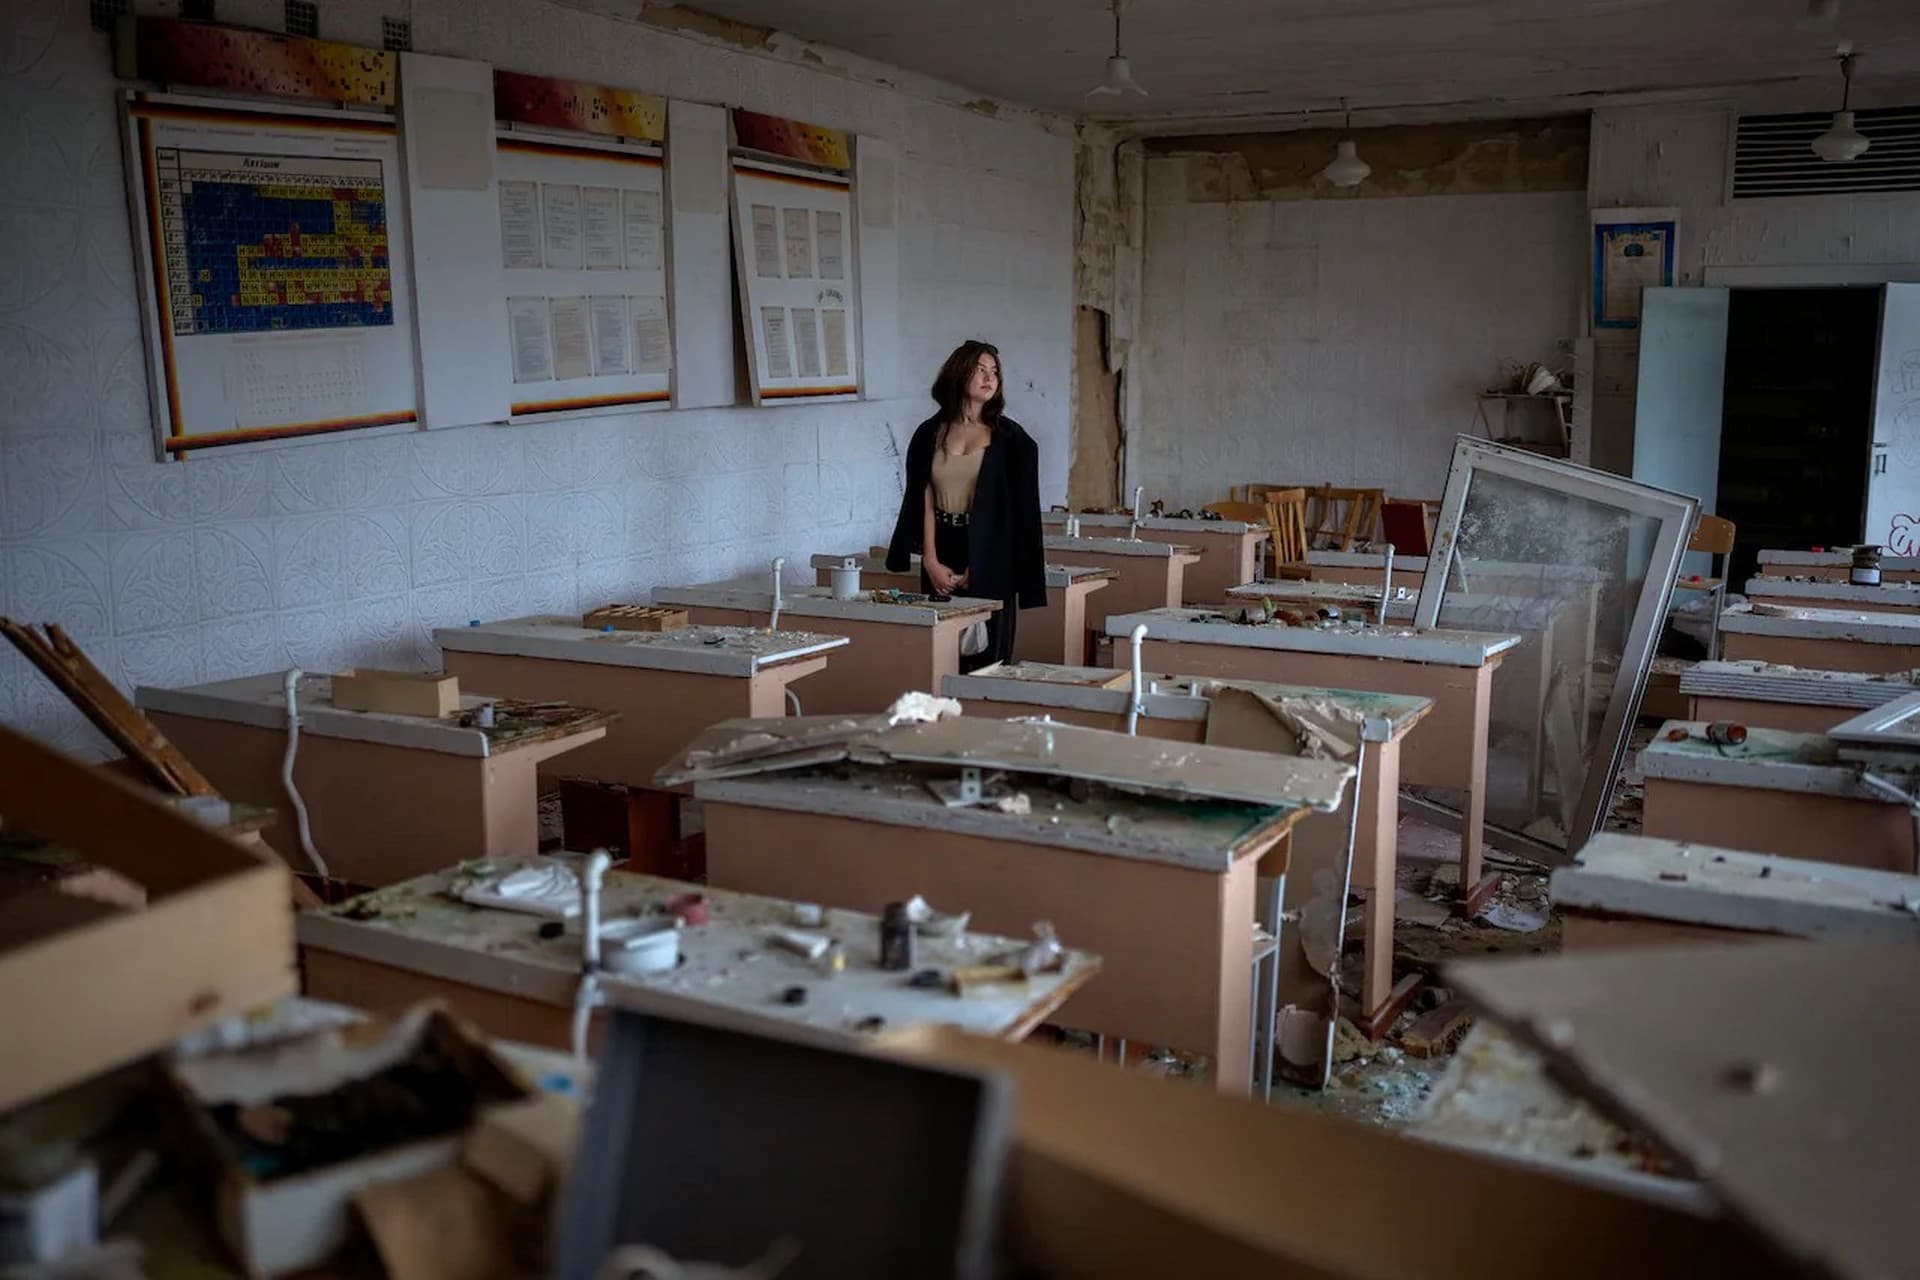 Surrounded by shards of broken glass and rubble Khrystyna Ignatova, sits at her desk in the remains of her classroom in the Chernihiv School #21